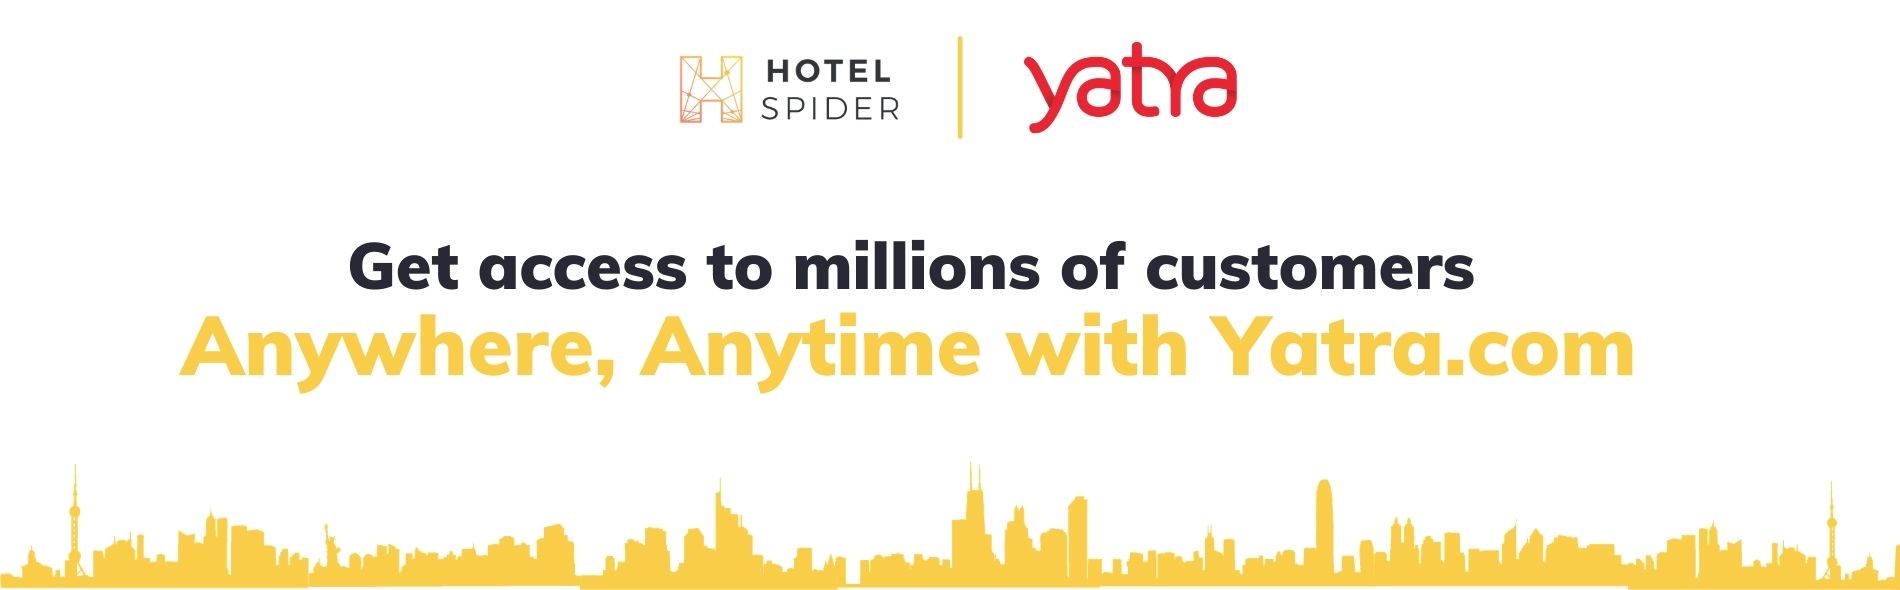 Get acces to millioons of costumers with Yatra.com and Hotel-Spider